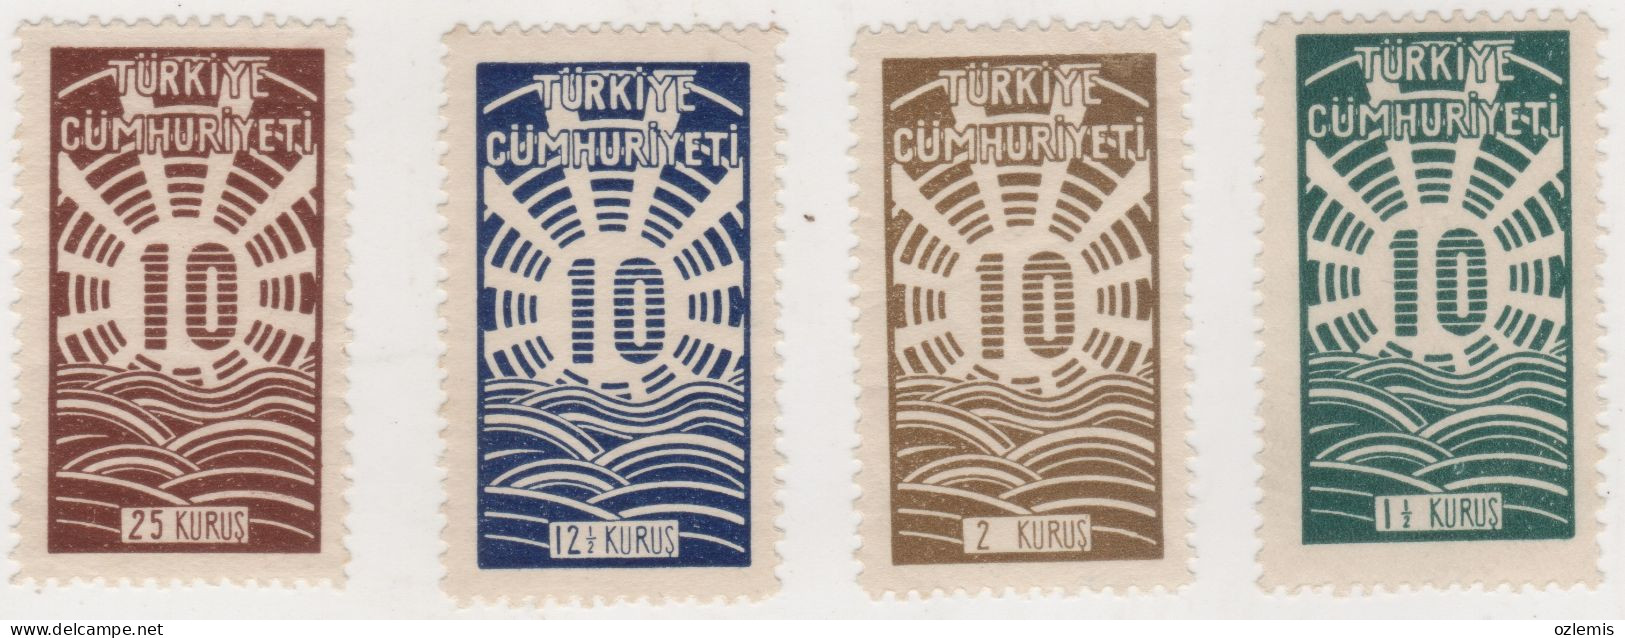 TURKEY,TURKEI,TURQUIE ,1933 ,COMMEMORATIVE STAMPS FOR THE 100TH ANIVERSARY OF THE REPUBLIC,,,STAMP,MNH - Nuovi